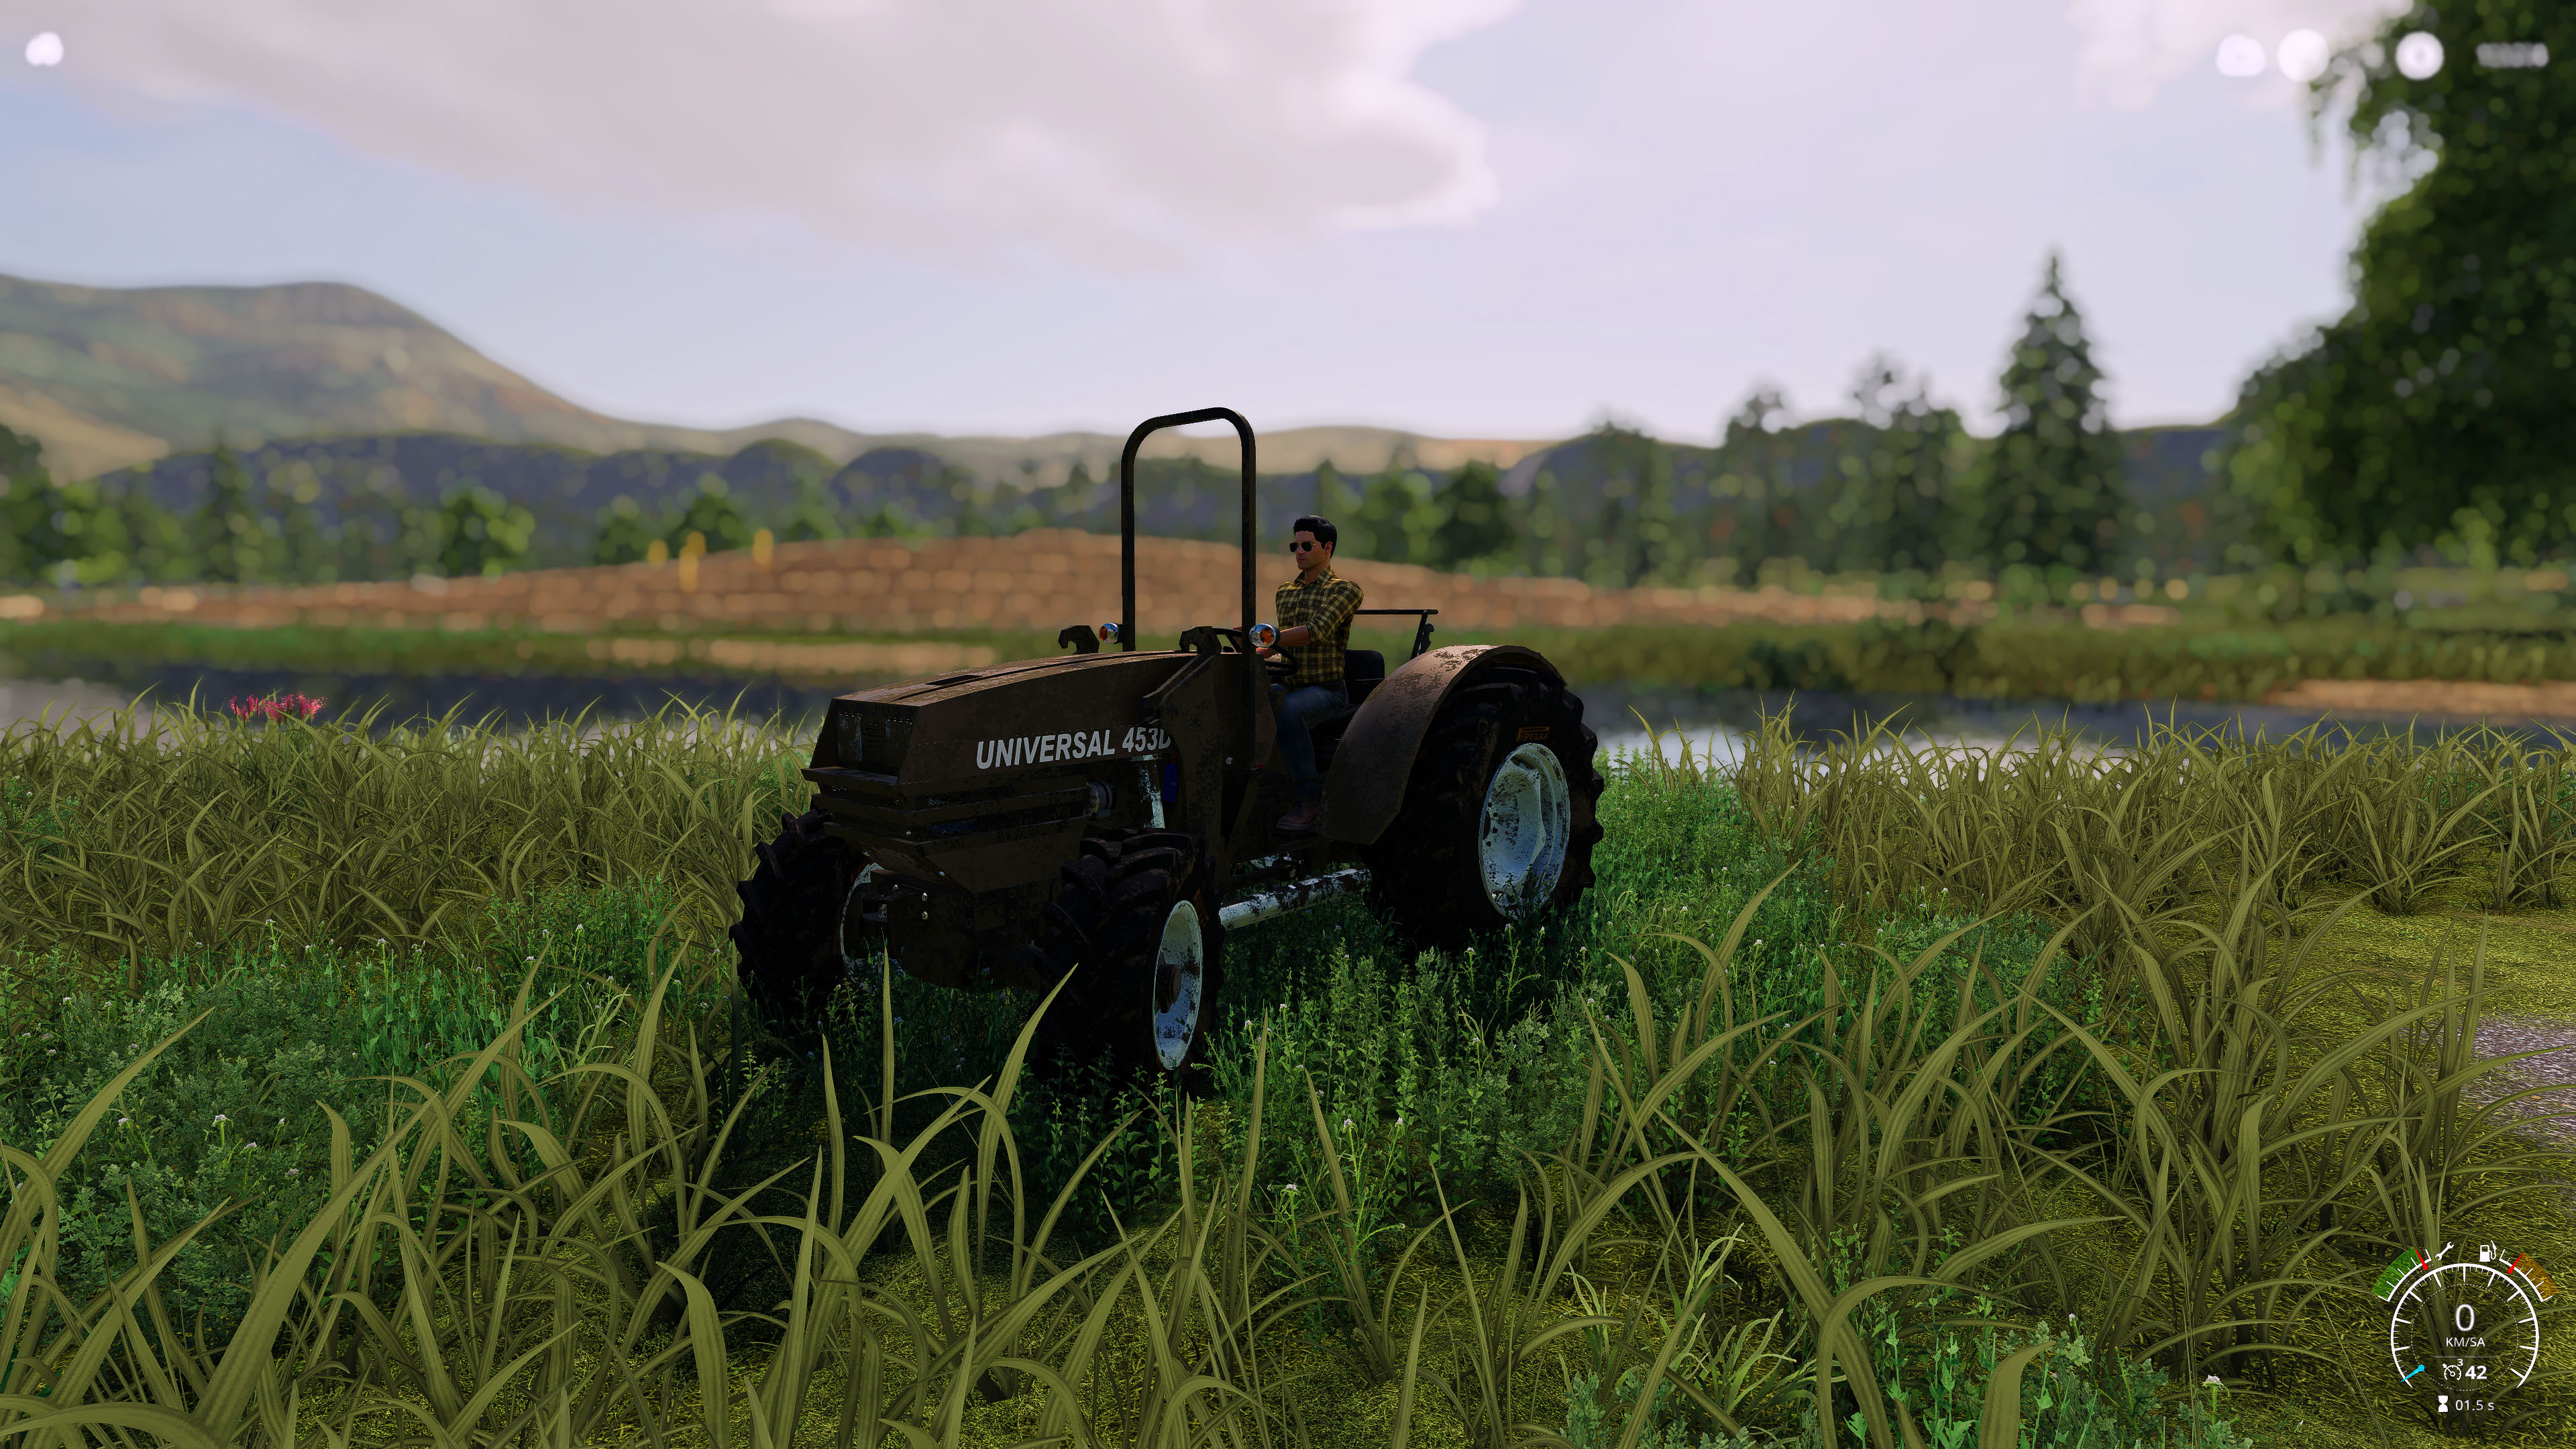 Farming Farming Simulator Farming Simulator 2019 Farmers Forest Trees Tractors Stone Water River Sil 3840x2160